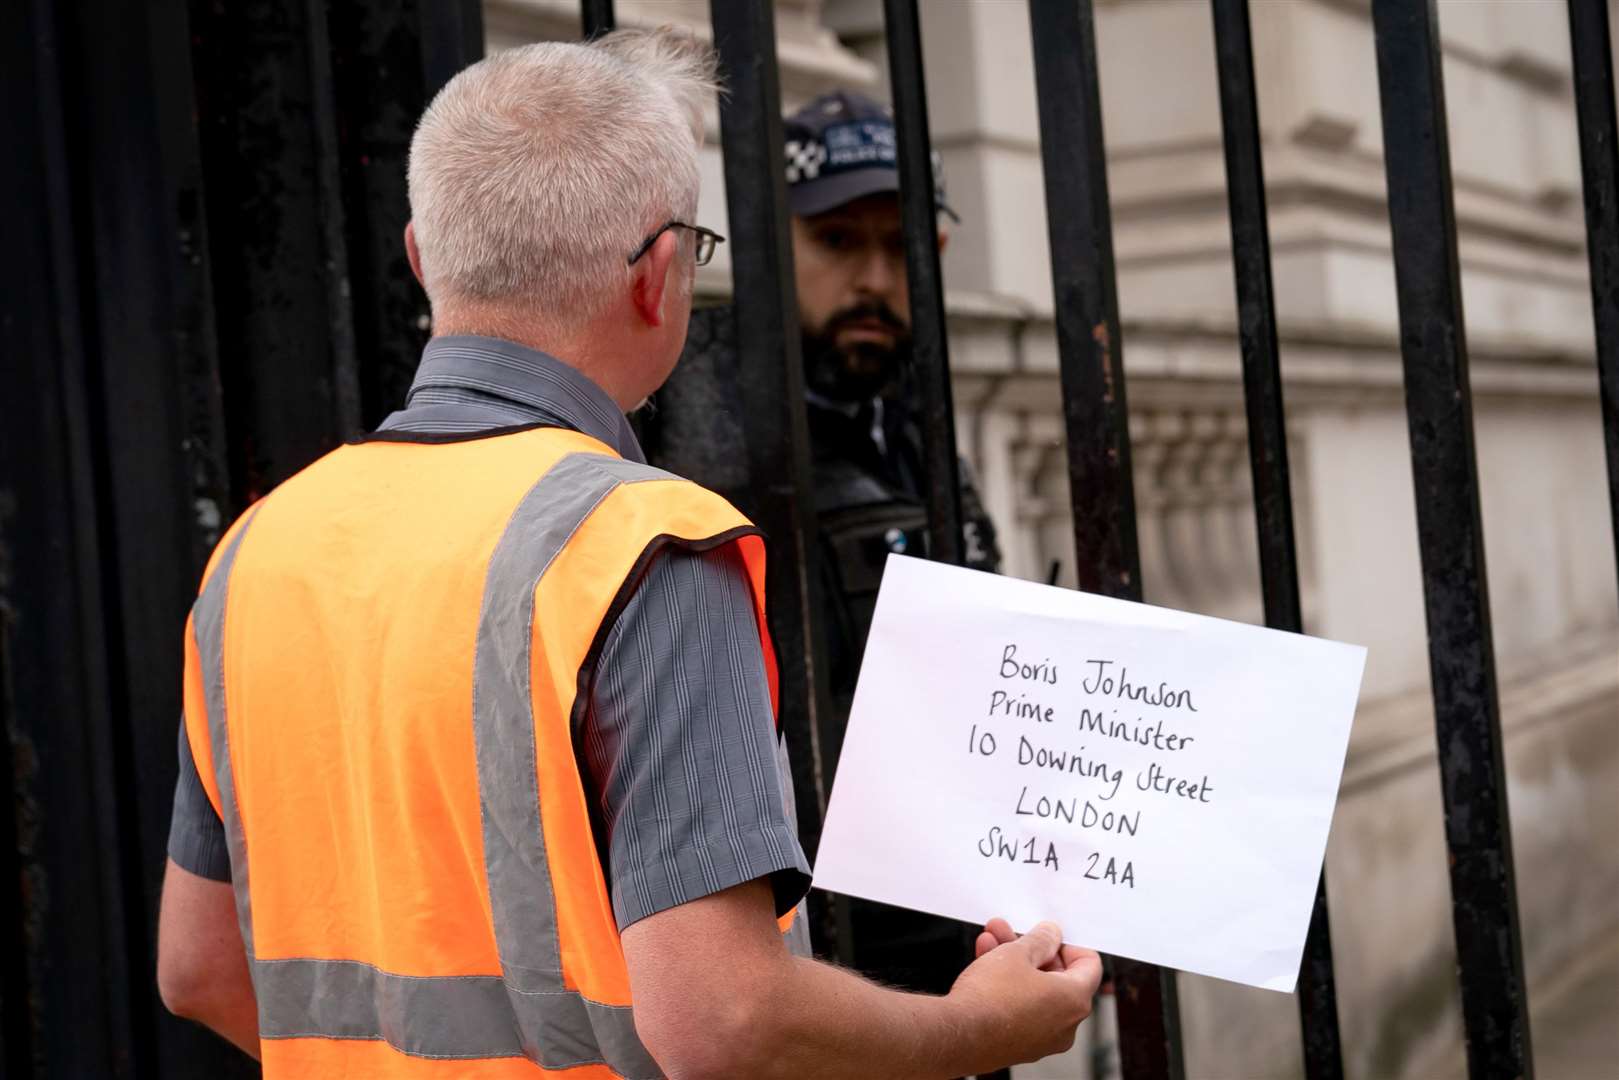 A member of Insulate Britain attempts to hand in a letter for Prime Minister Boris Johnson at 10 Downing Street (Aaron Chown/PA